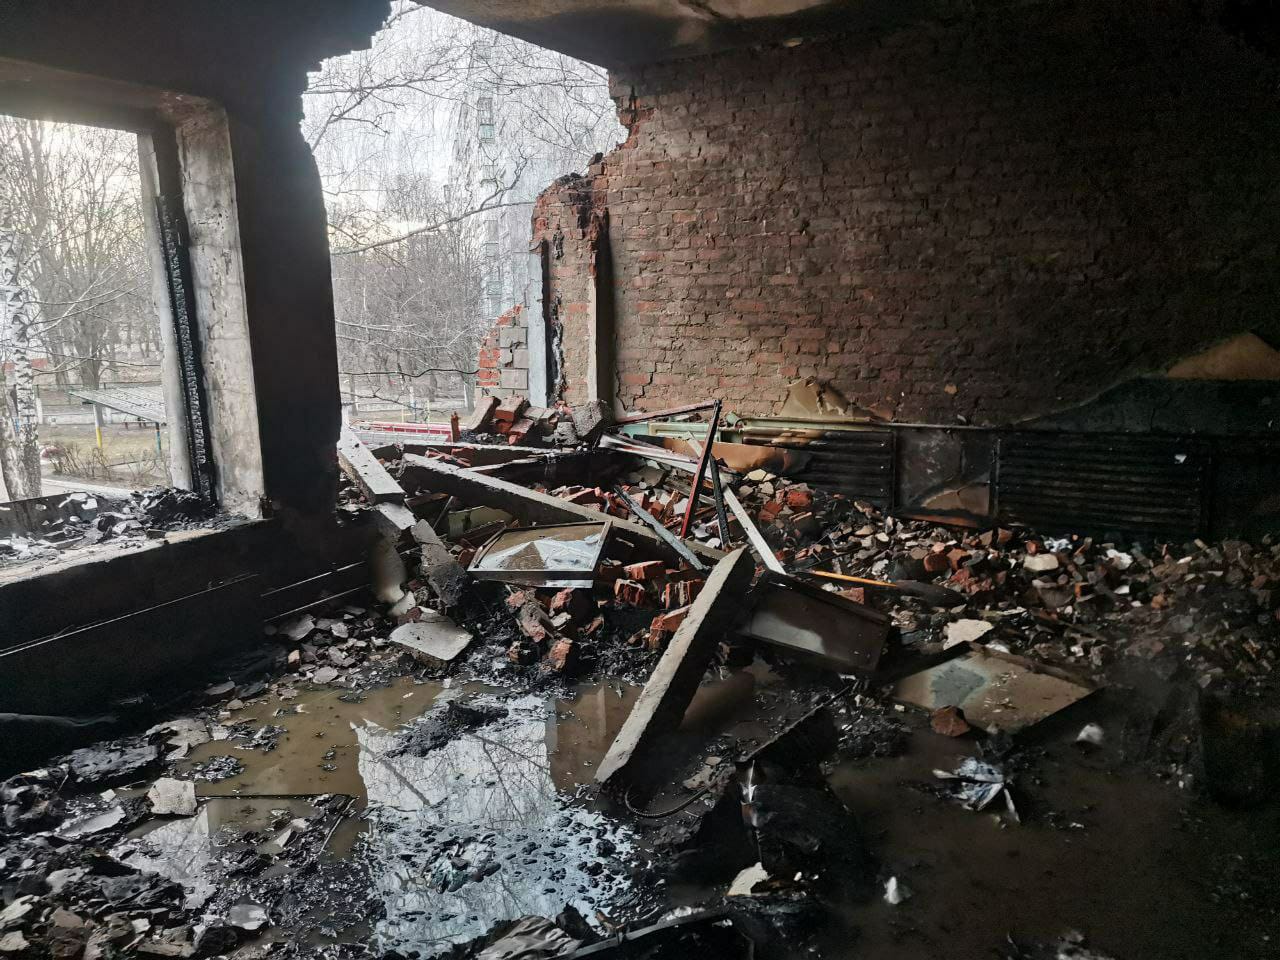 UNESCO reports damage to churches, historical sites and museums in Ukraine